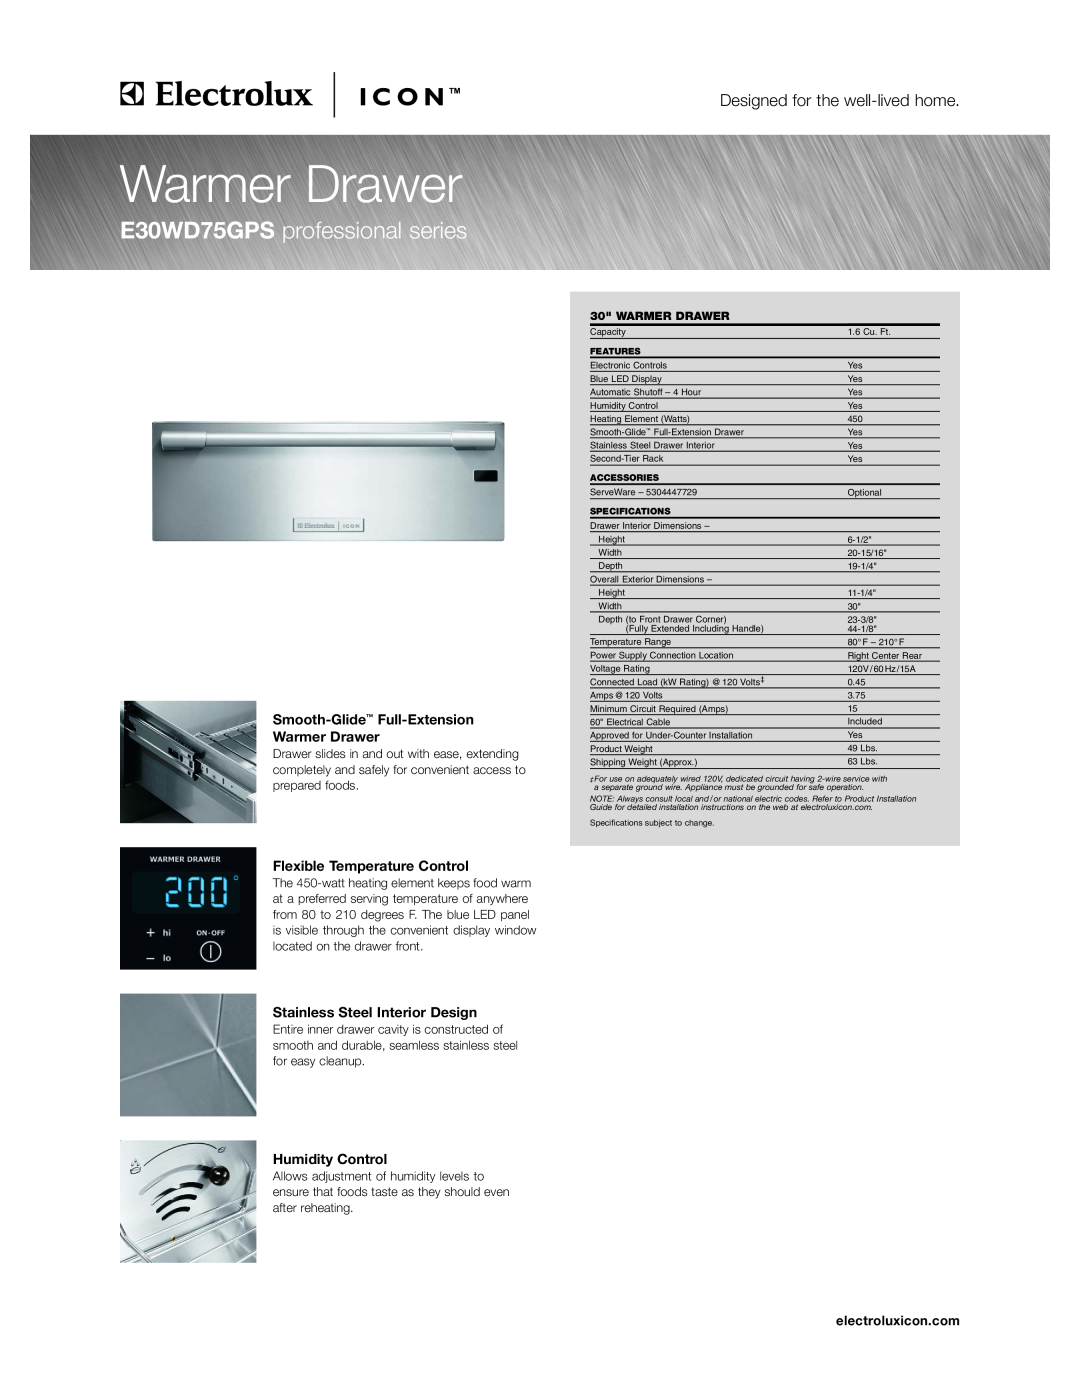 Electrolux E30WD75GPS specifications Smooth-Glide Full-Extension Warmer Drawer, Flexible Temperature Control 